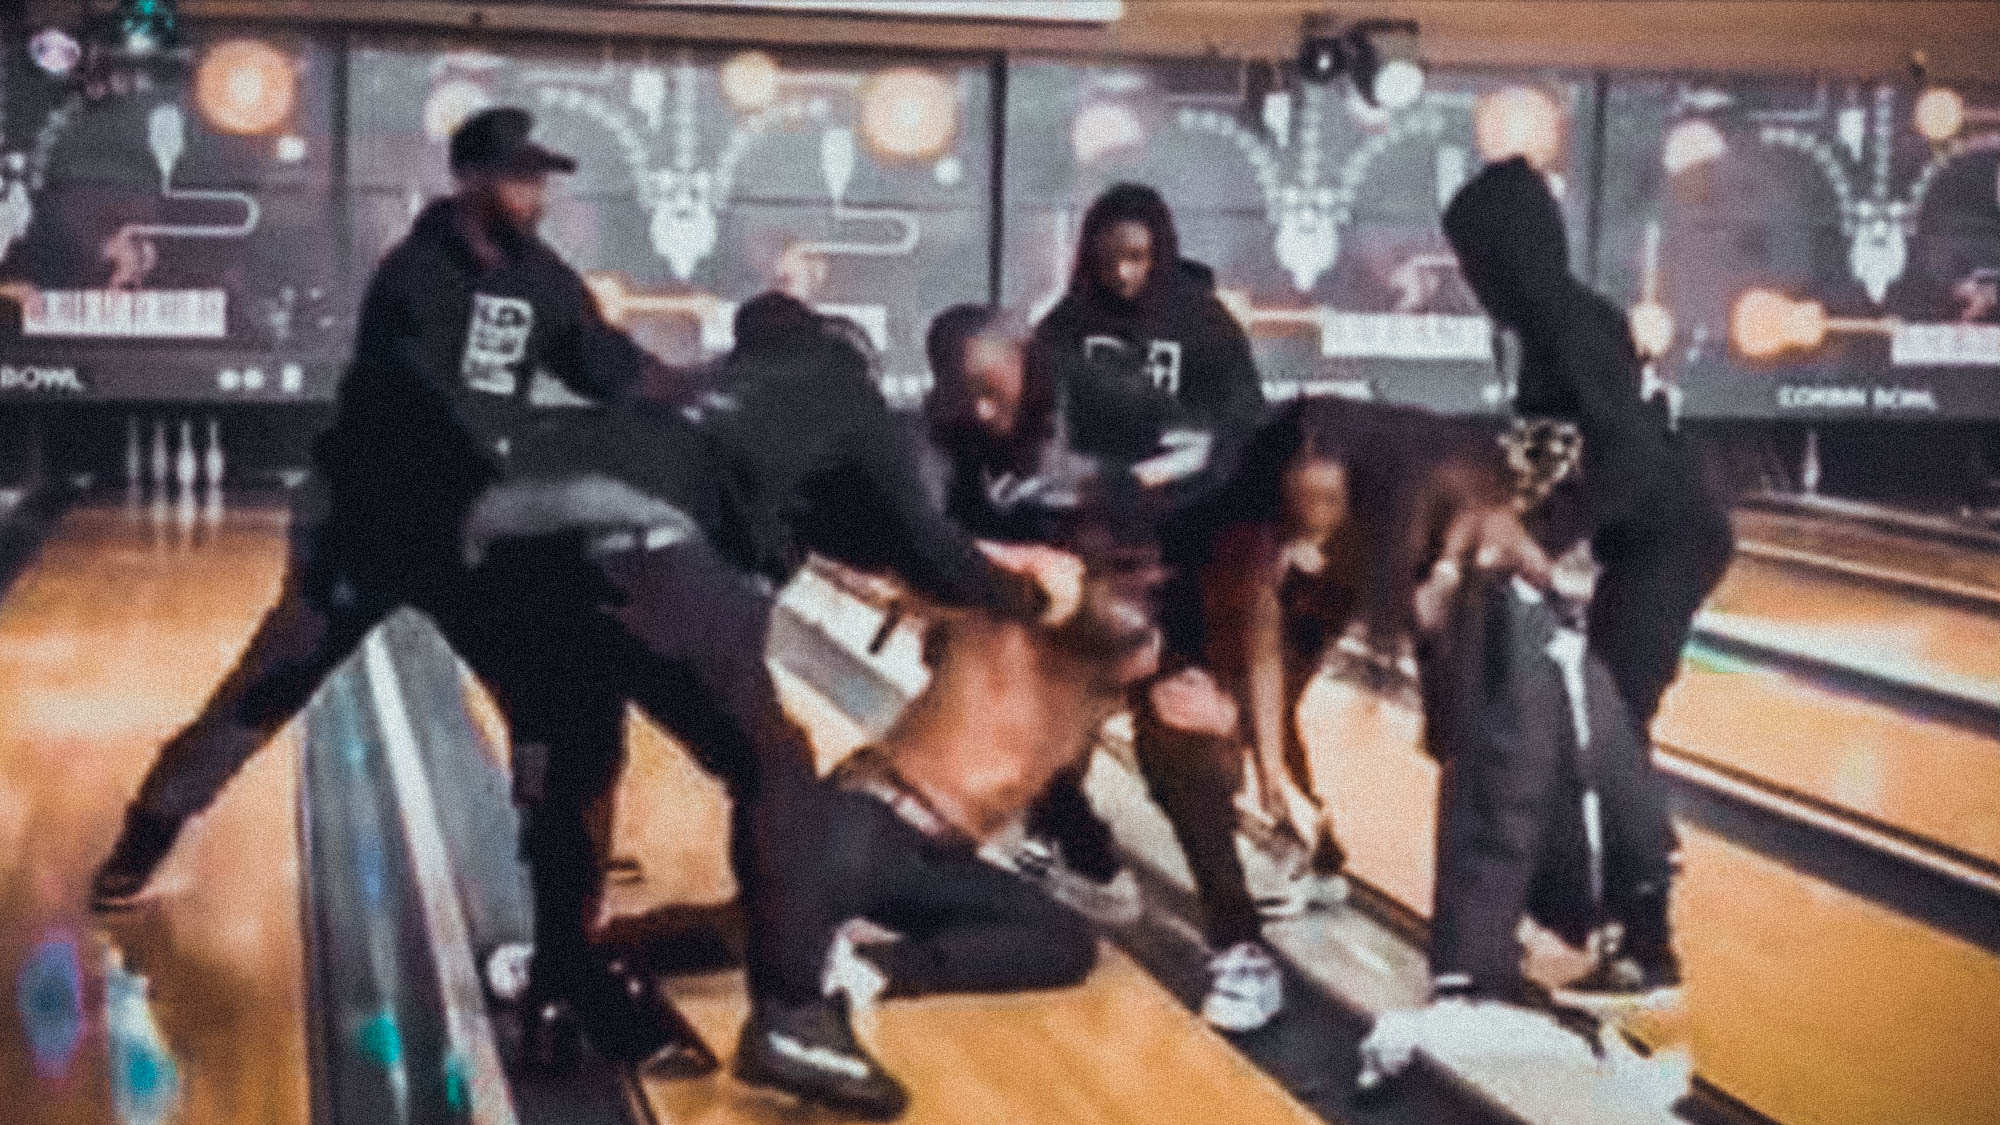 DaBaby and DaniLeigh's brother get into a physical fight at Bowling Alley